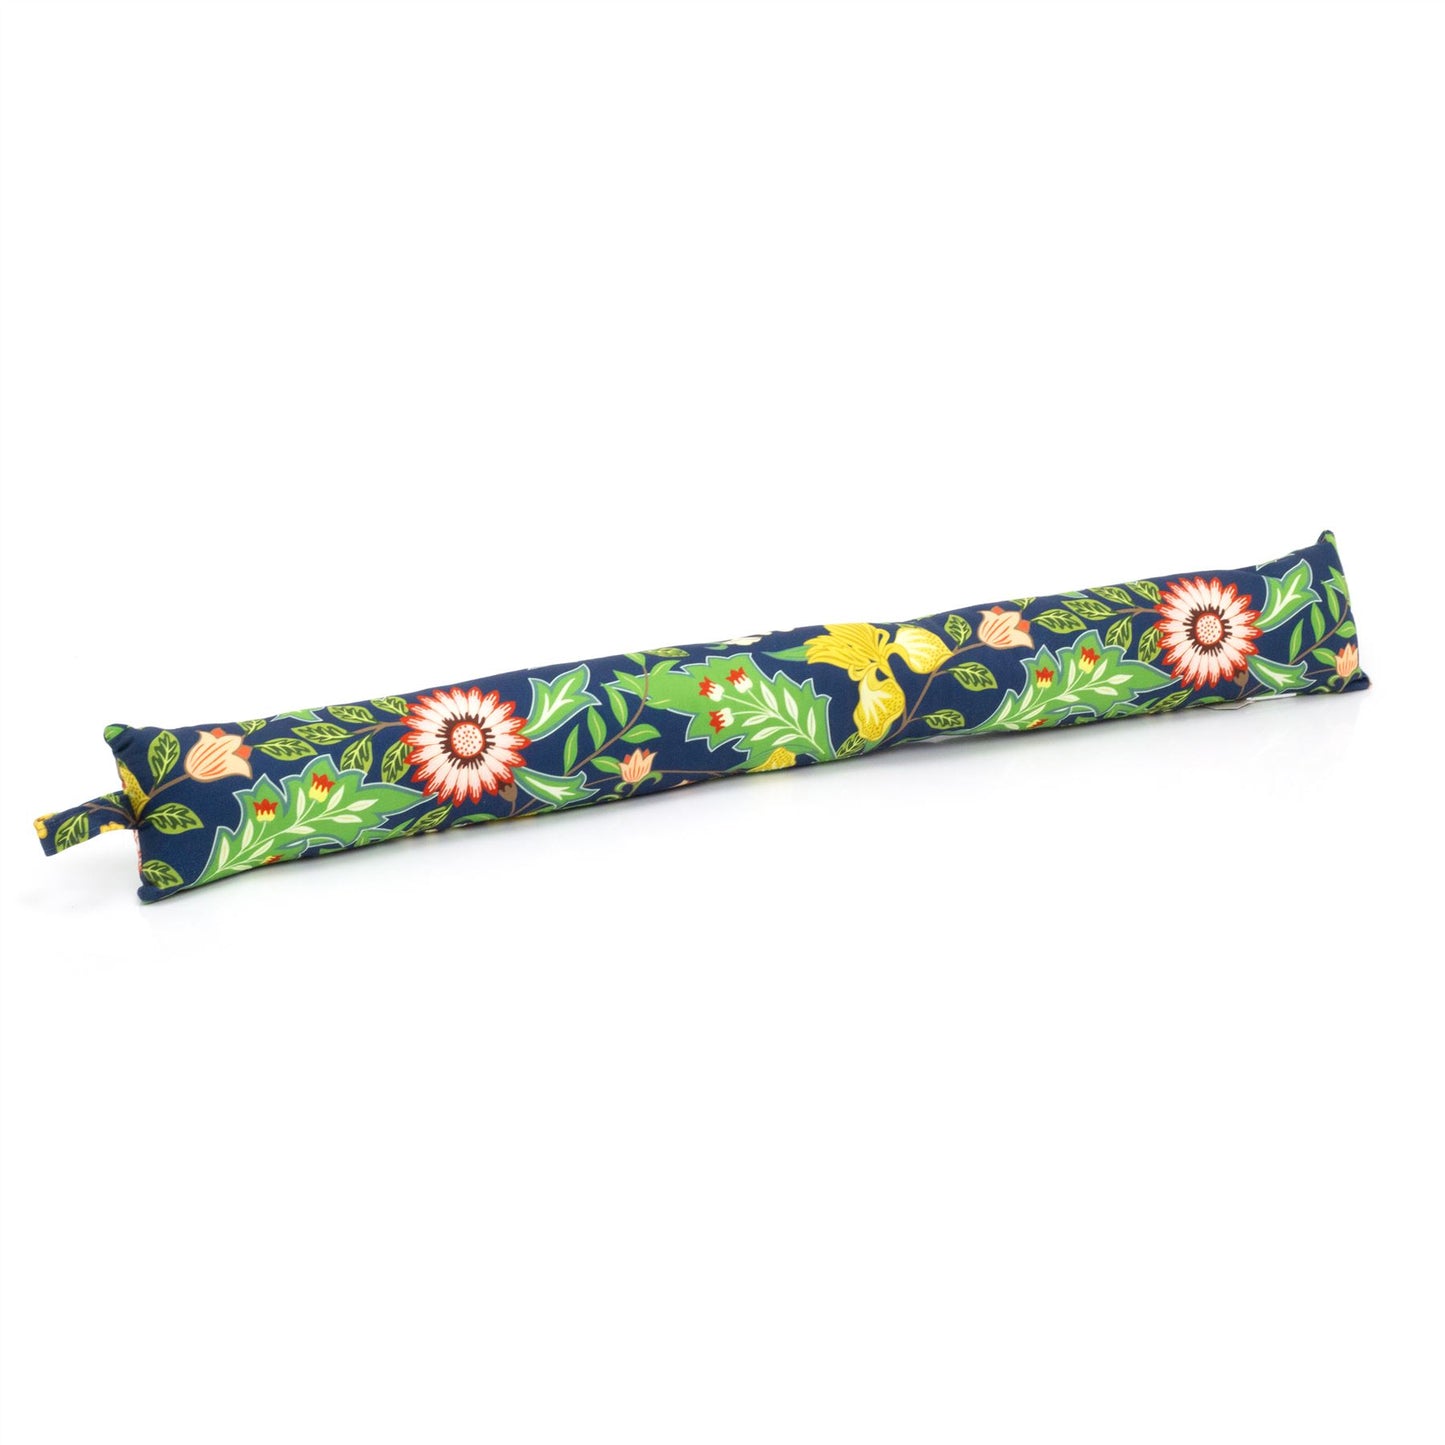 88cm Sussex Floral Fabric Door Draught Excluder | Winter Draft Excluder Door Cushion | Flower Draught Excluder For Doors Door Draught Cushion - Blue